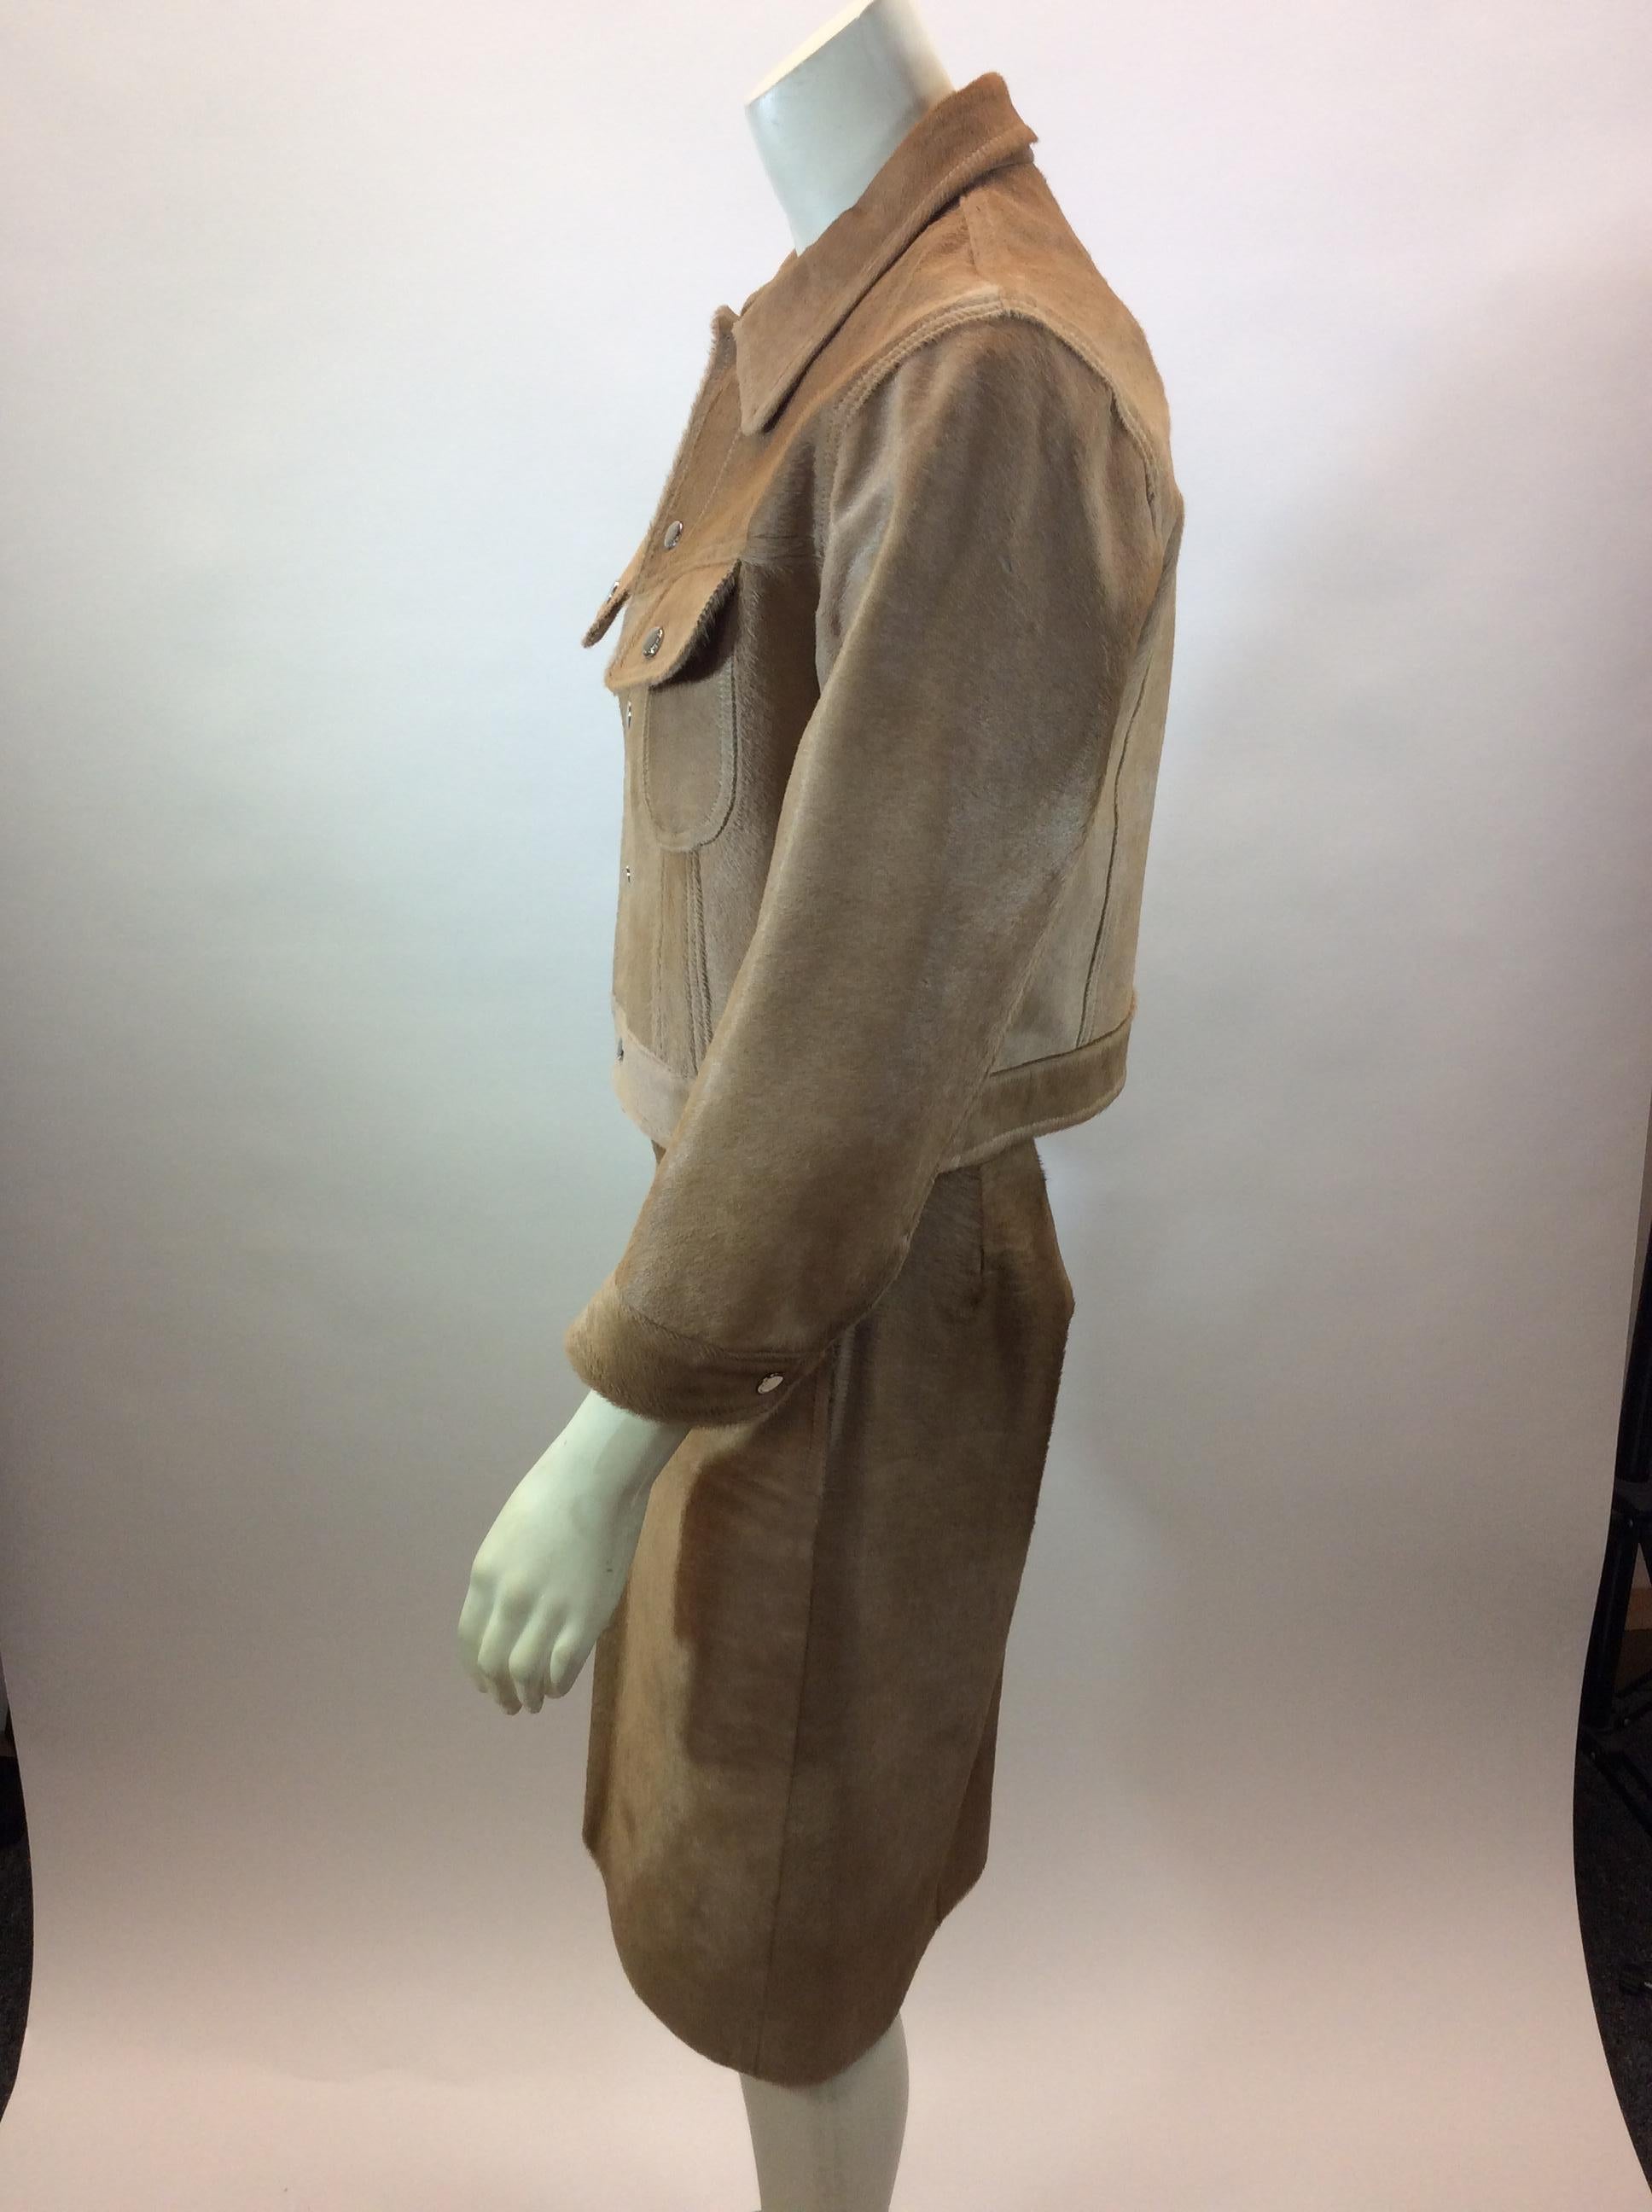 Ralph Lauren Black Label Tan Pony Hair Three Piece Skirt Suit
$550
Made in the US 
Leather
Jacket: Size 12
Length 18